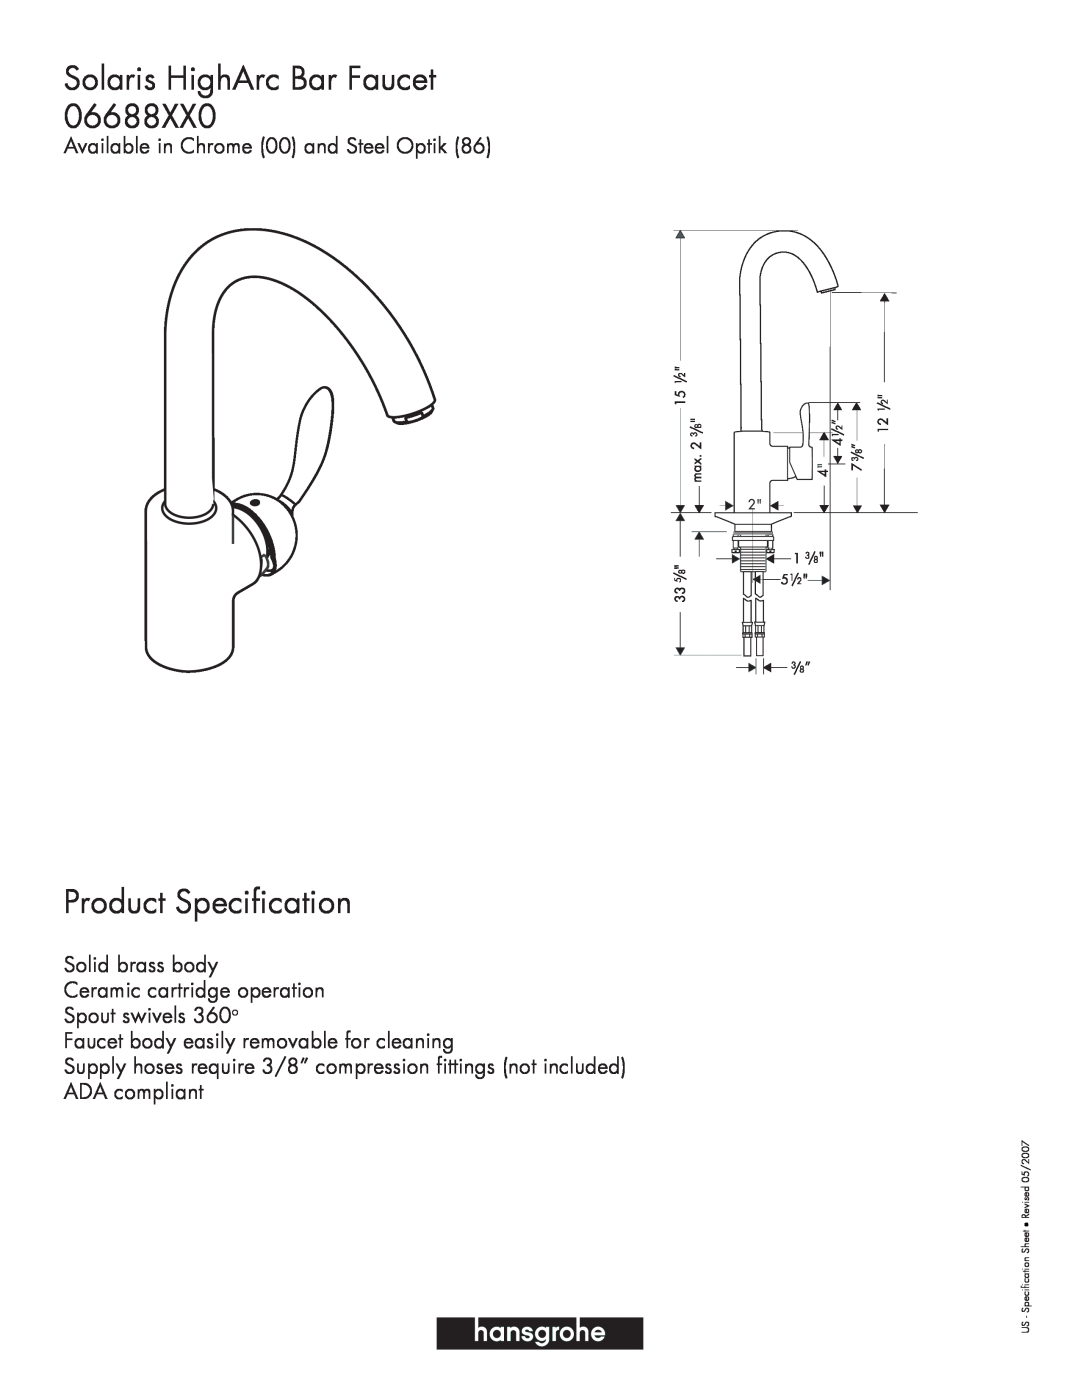 Axor specifications Solaris HighArc Bar Faucet, Product Specification, Available in Chrome 00 and Steel Optik 